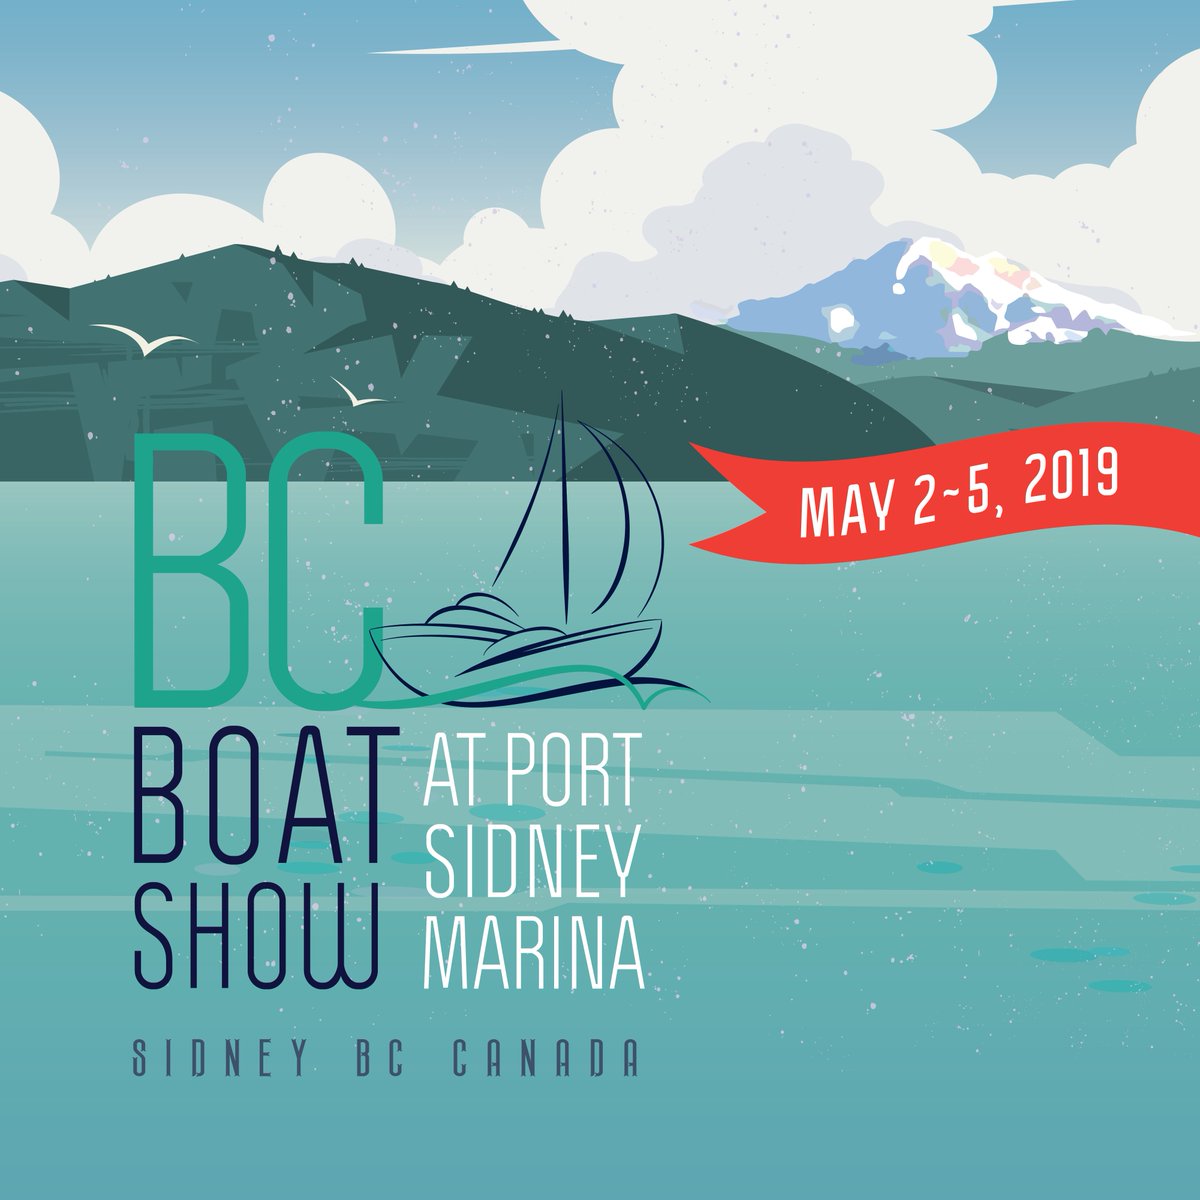 NEWS!! 2019 BC Boat Show dates announced - Join us May 2-5, 2019 for the @BCBoatShow at Port Sidney Marina in spectacular Sidney on Vancouver Island, BC! ☀️🛥️ #bcboatshow #yyj #yvr #bc #boating #seattle #yacht